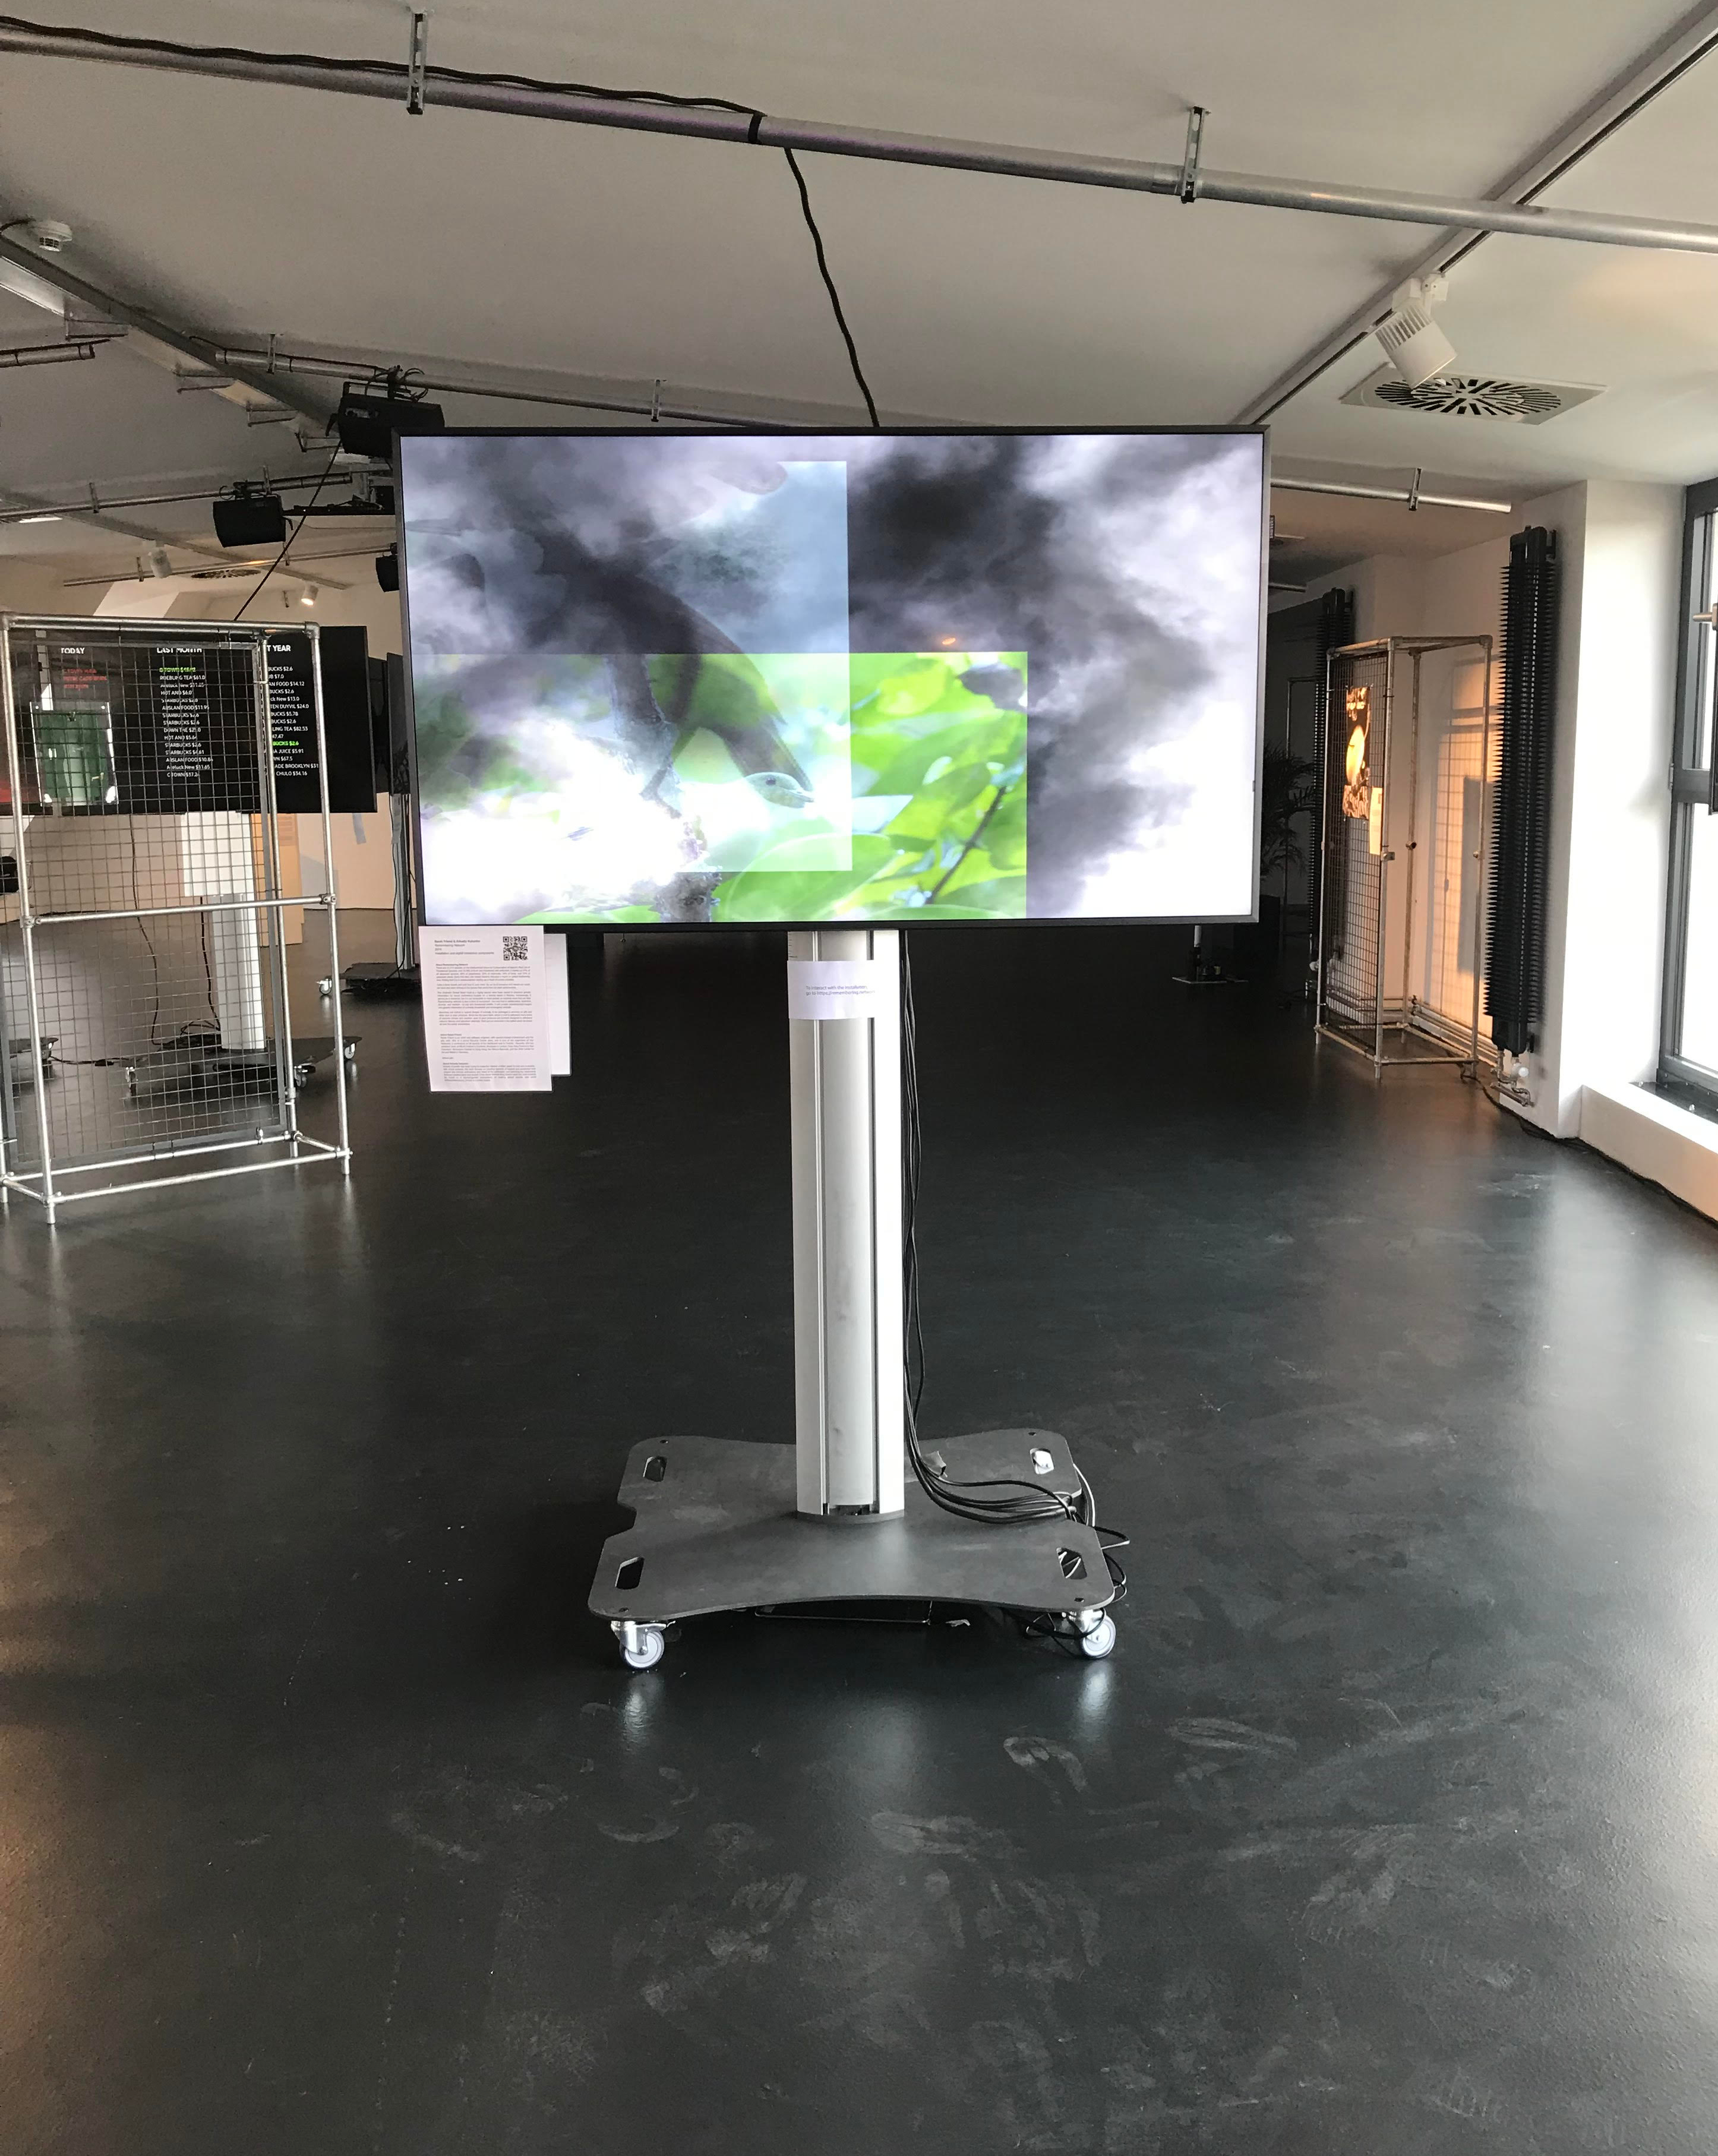 Remembering Network at installed on a monitor in a brightly lit room at Eth Berlin